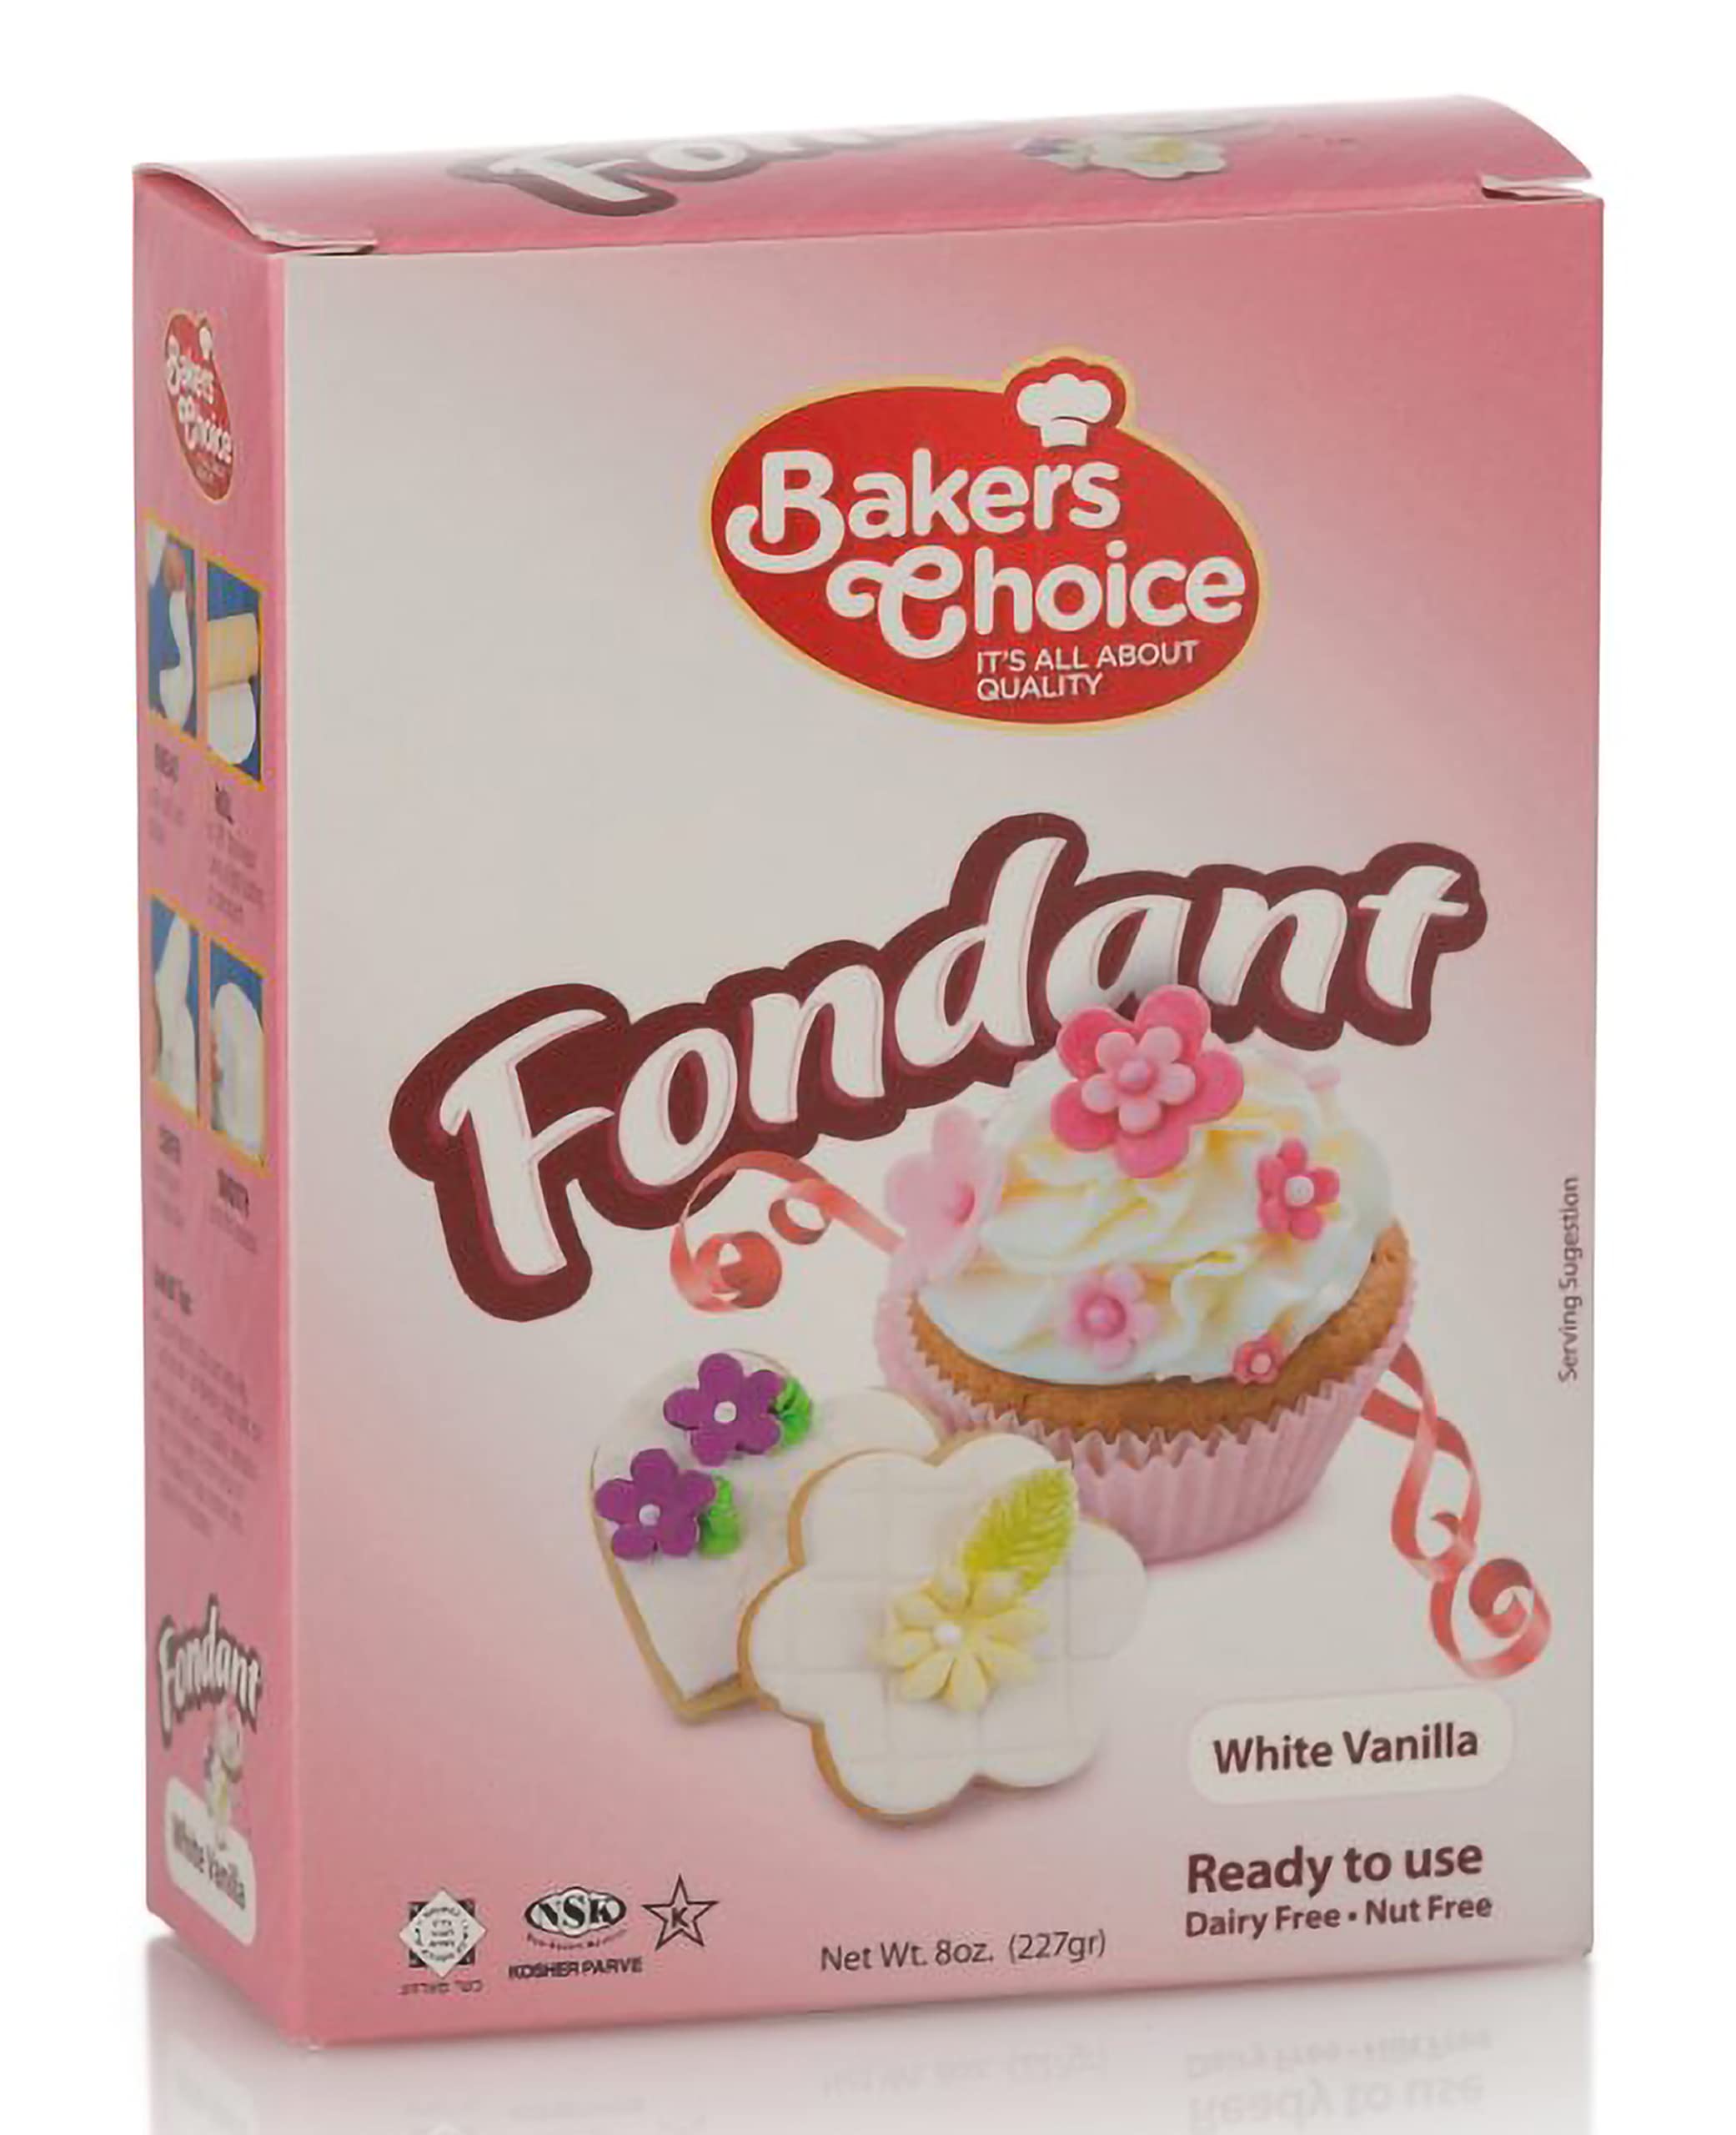 Baker's Choice Black Fondant Icing-4 oz.-Ready to Use Cake Decorating Frosting-Easy to Roll,Moldable,Kosher,Dairy Free,and Nut FREE-BLACK Fondant